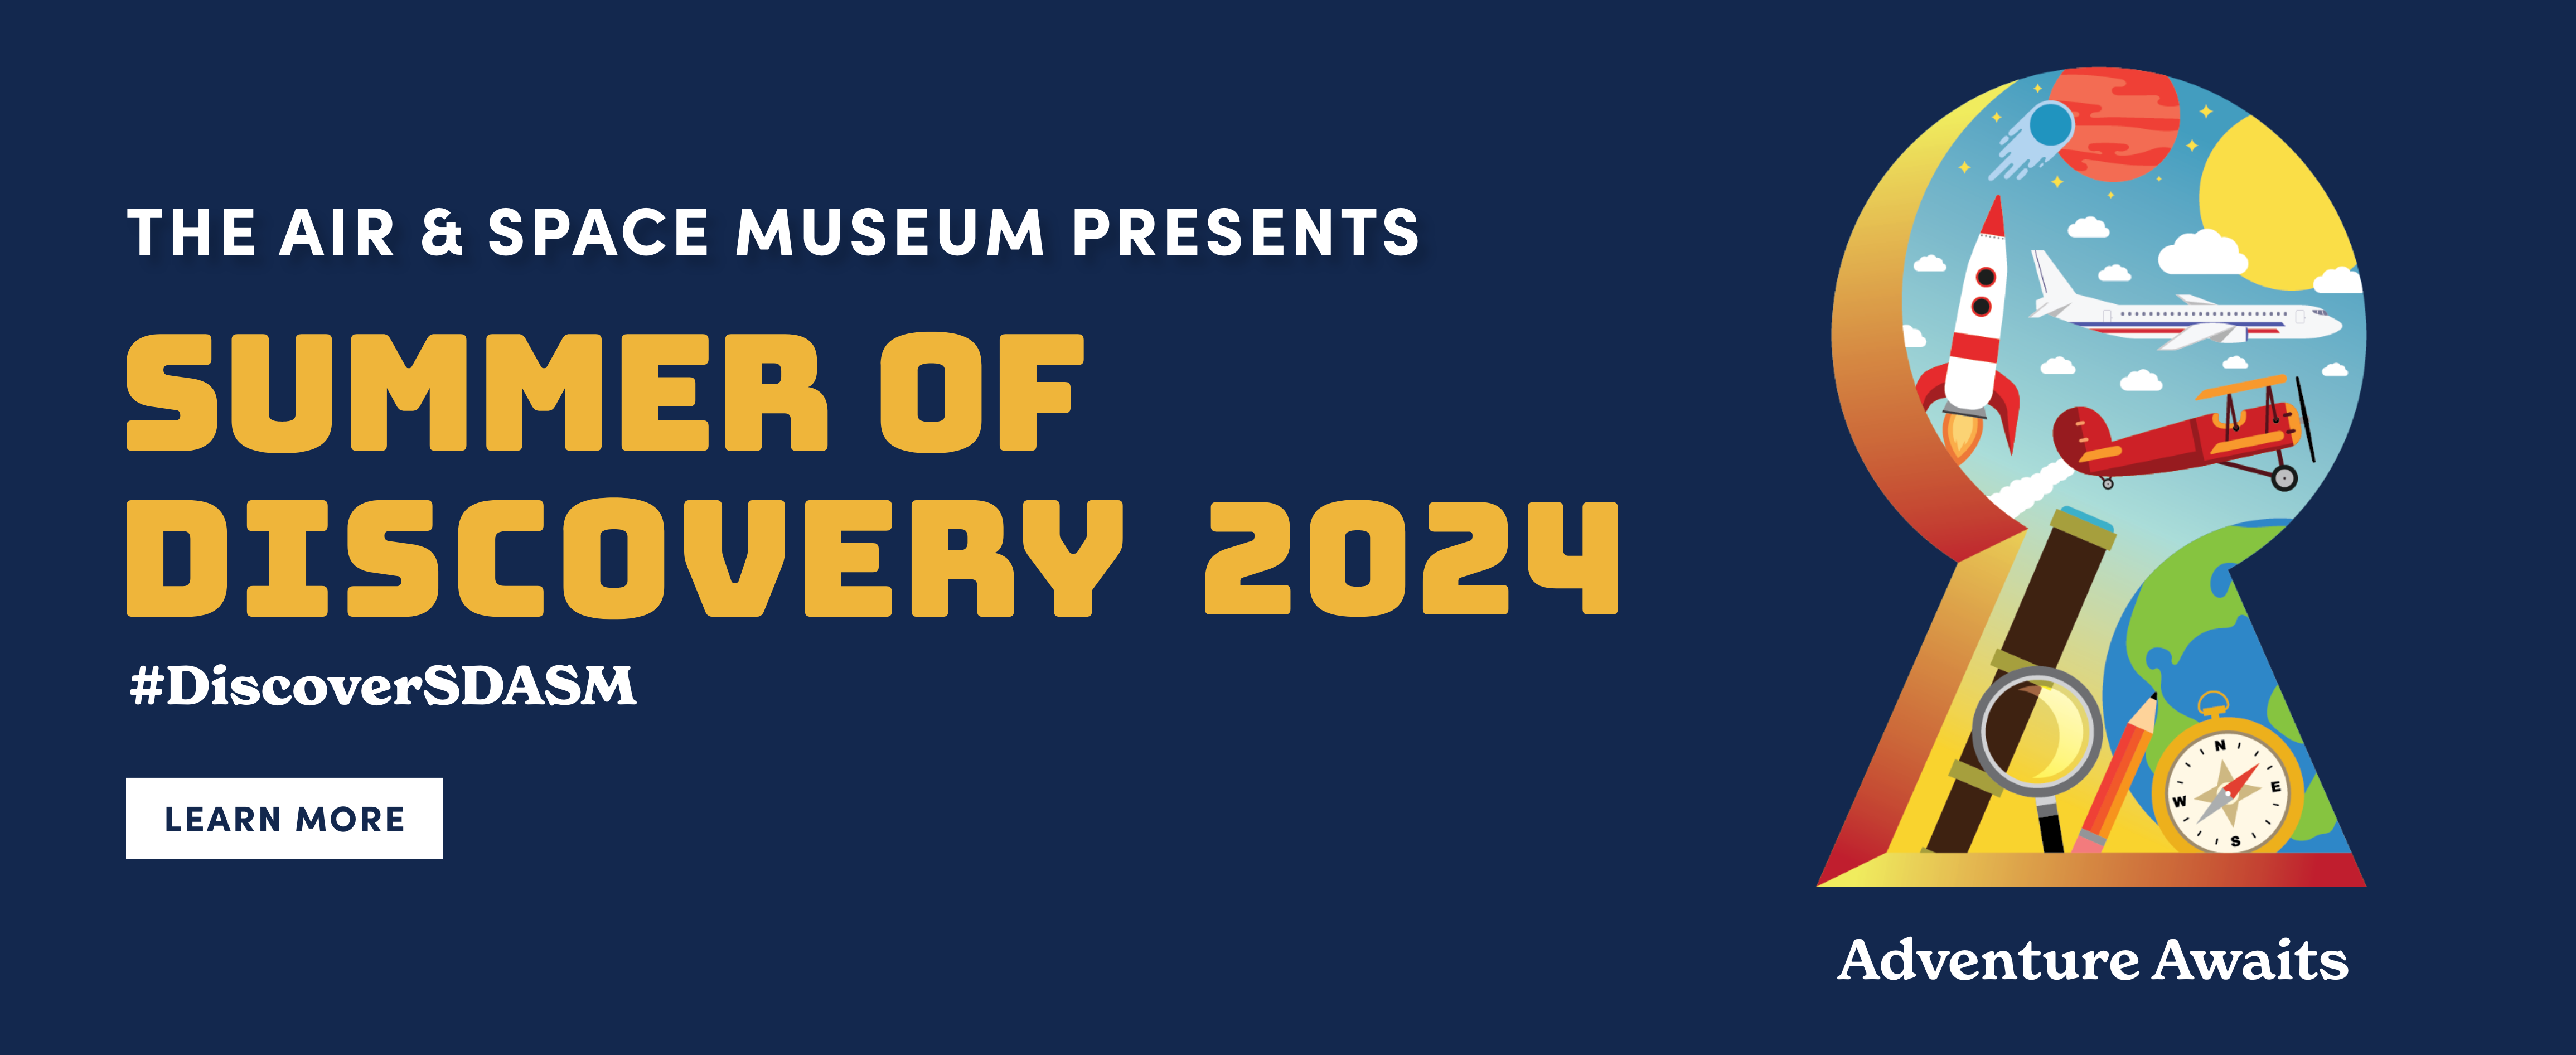 Summer of Discovery at the San Diego Air & Space Museum Banner